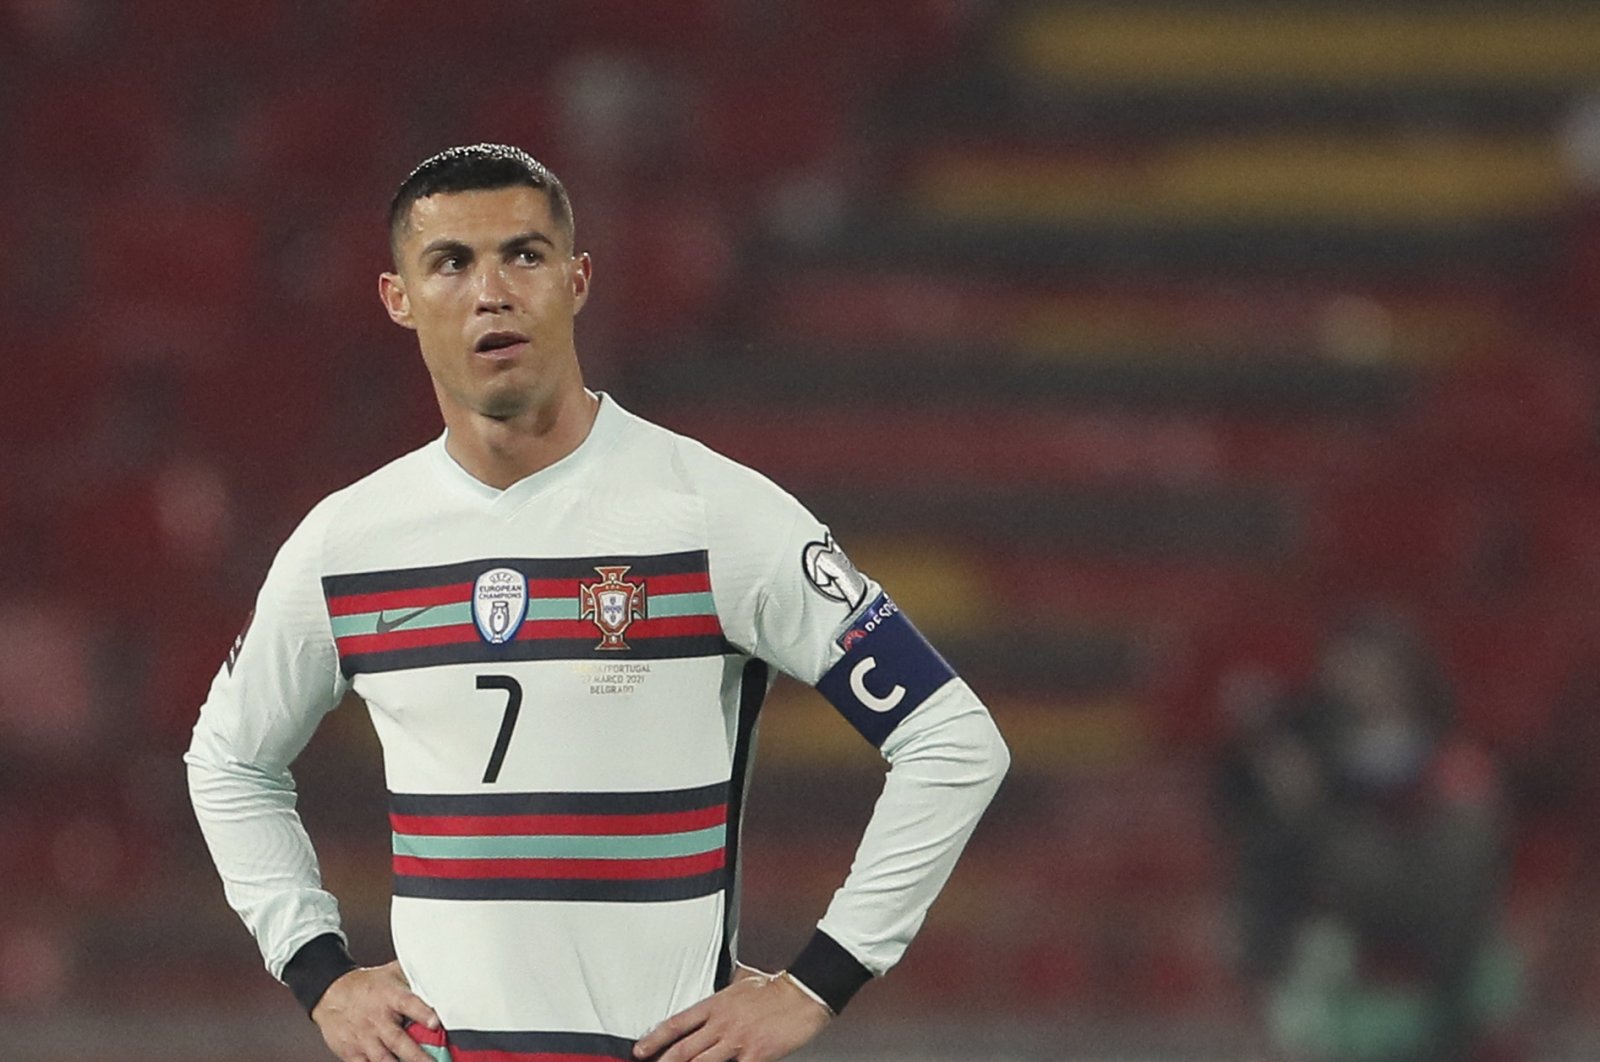 Portugal's forward Cristiano Ronaldo reacts at the end of the FIFA World Cup Qatar 2022 qualification Group A football match between Serbia and Portugal at the Rajko Mitic Stadium, in Belgrade, Serbia, March 27, 2021. (AFP Photo)